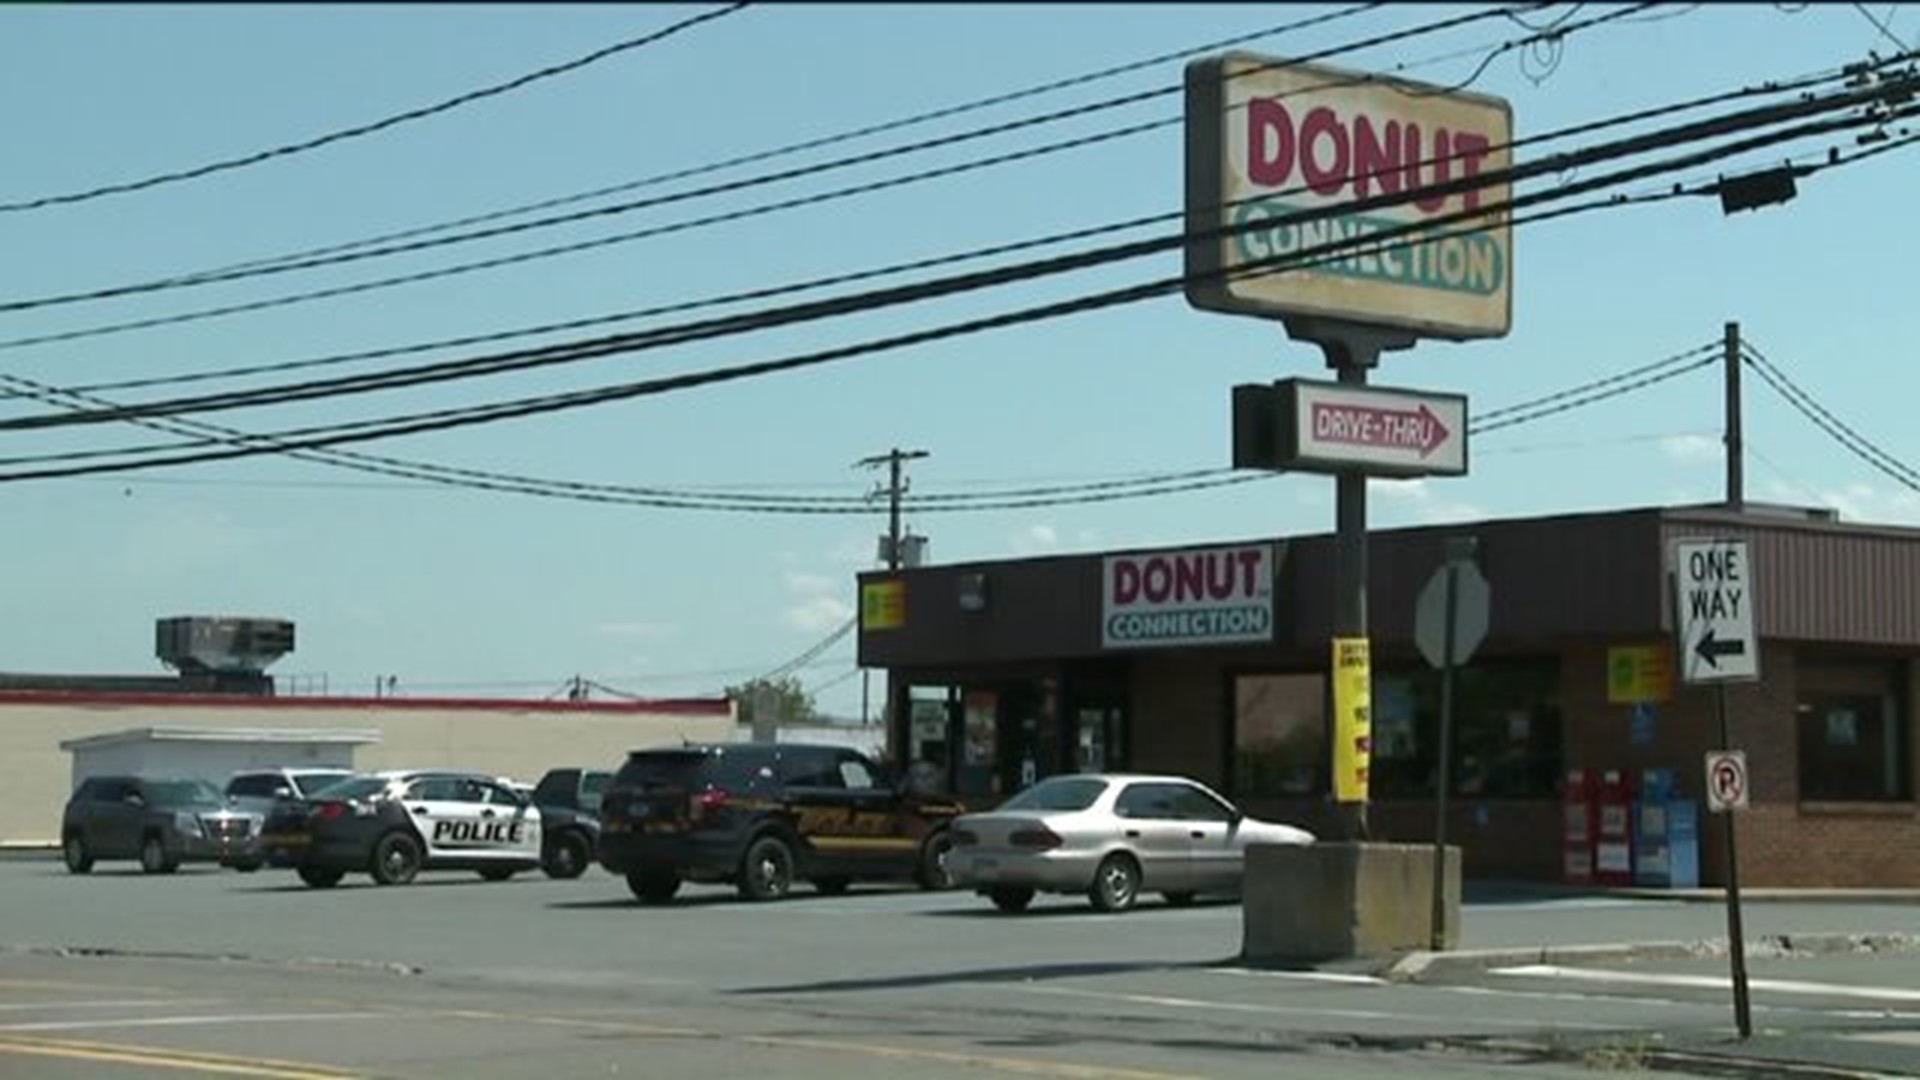 Attempted Robbery at Donut Shop